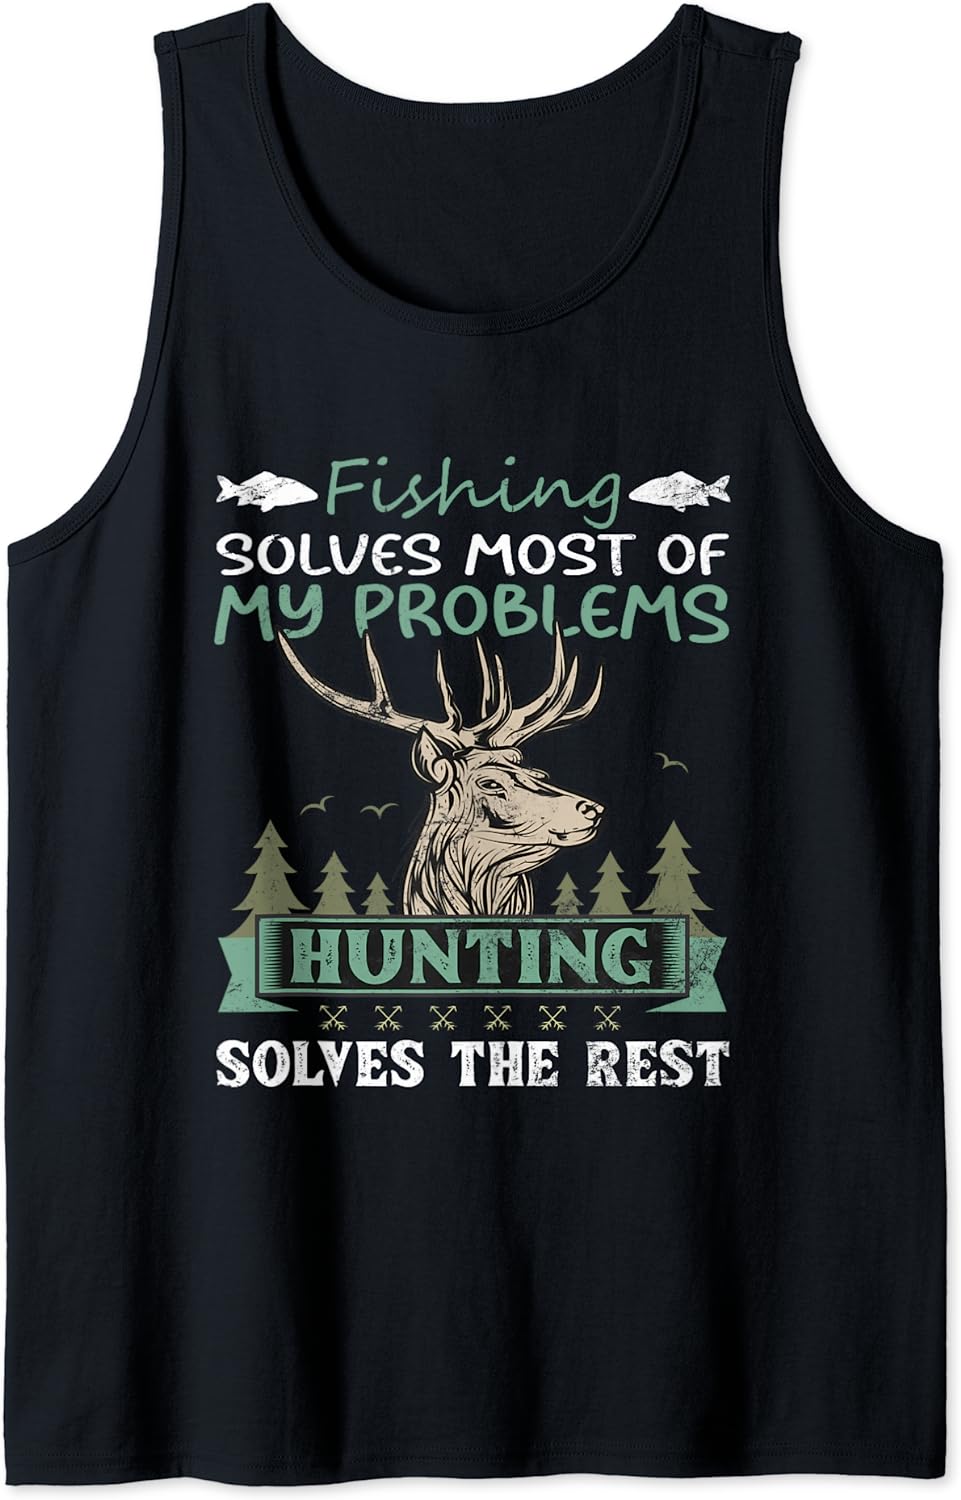 Fishing Solves Most Of My Problems,Hunting Solves The Rest F Tank Top Best Price